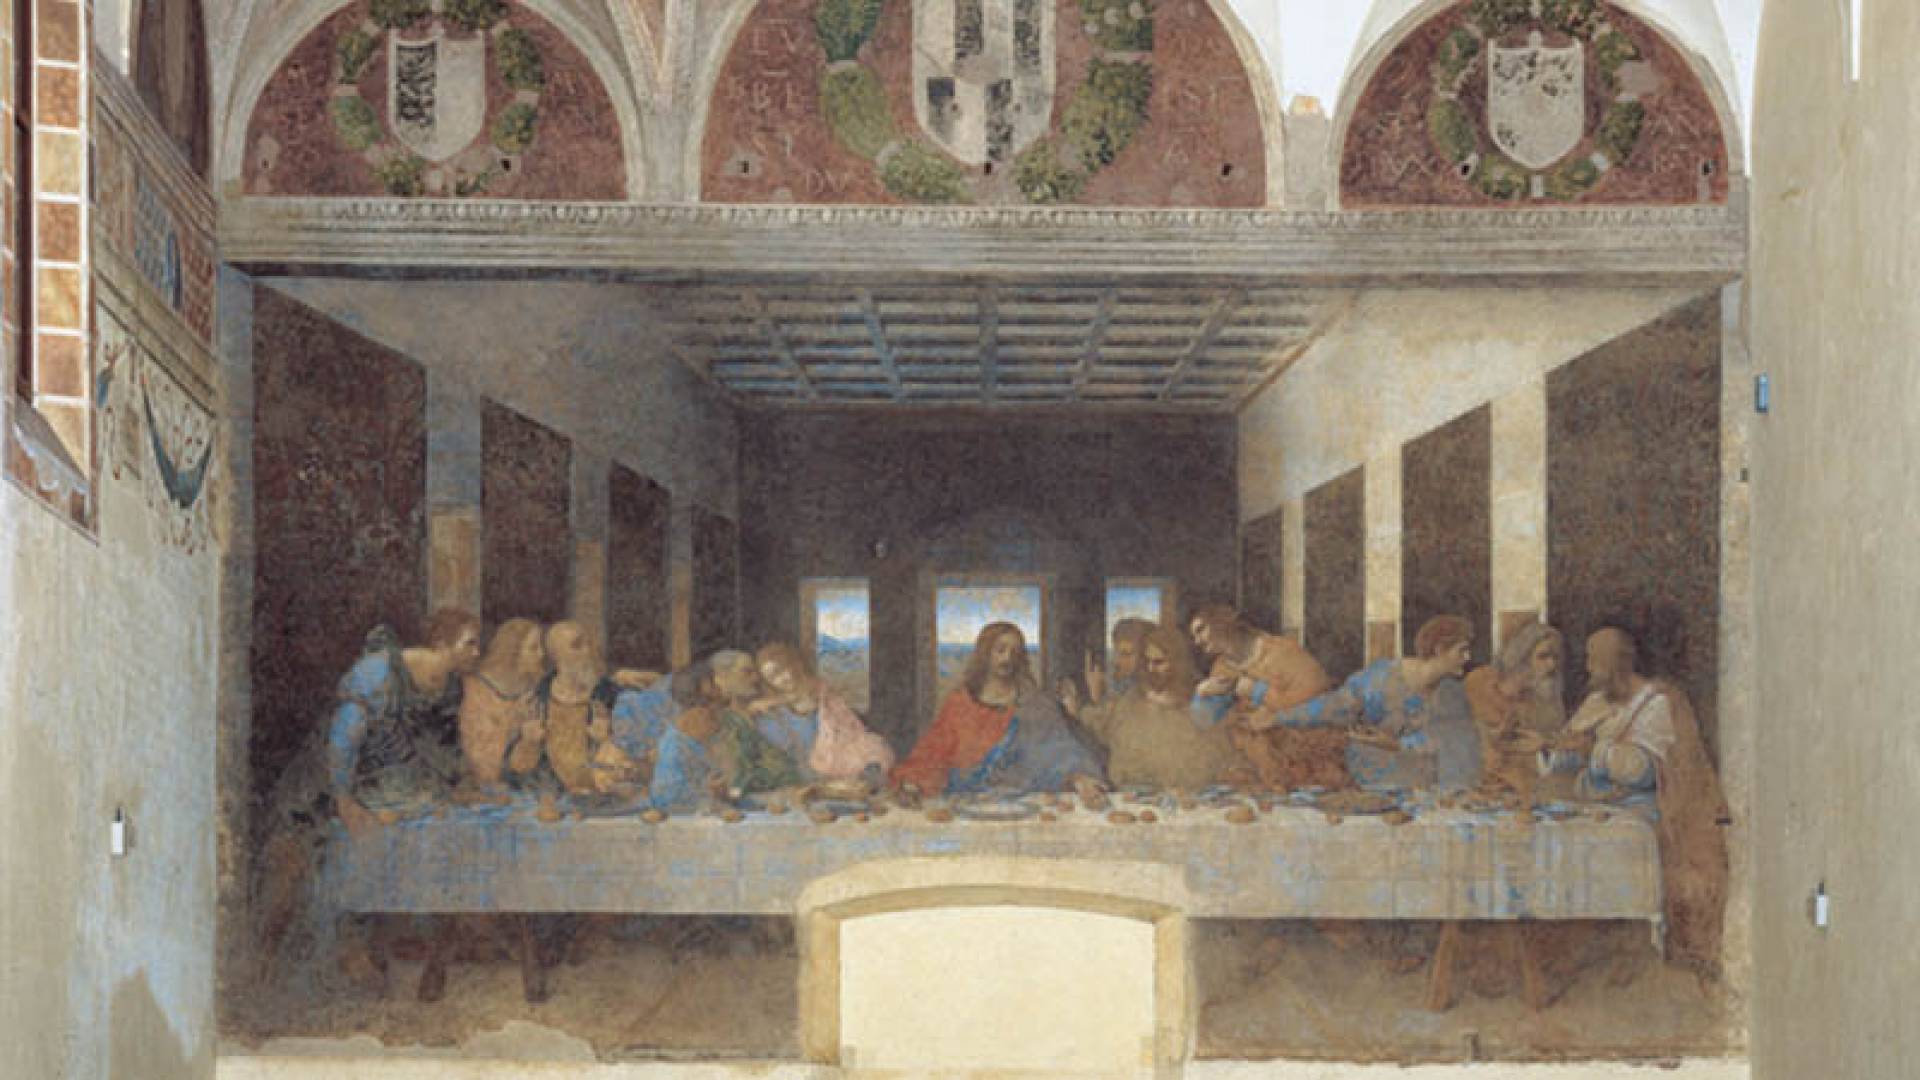 HOLY MARY OF GRACE - THE LAST SUPPER, The Last Supper - Technique